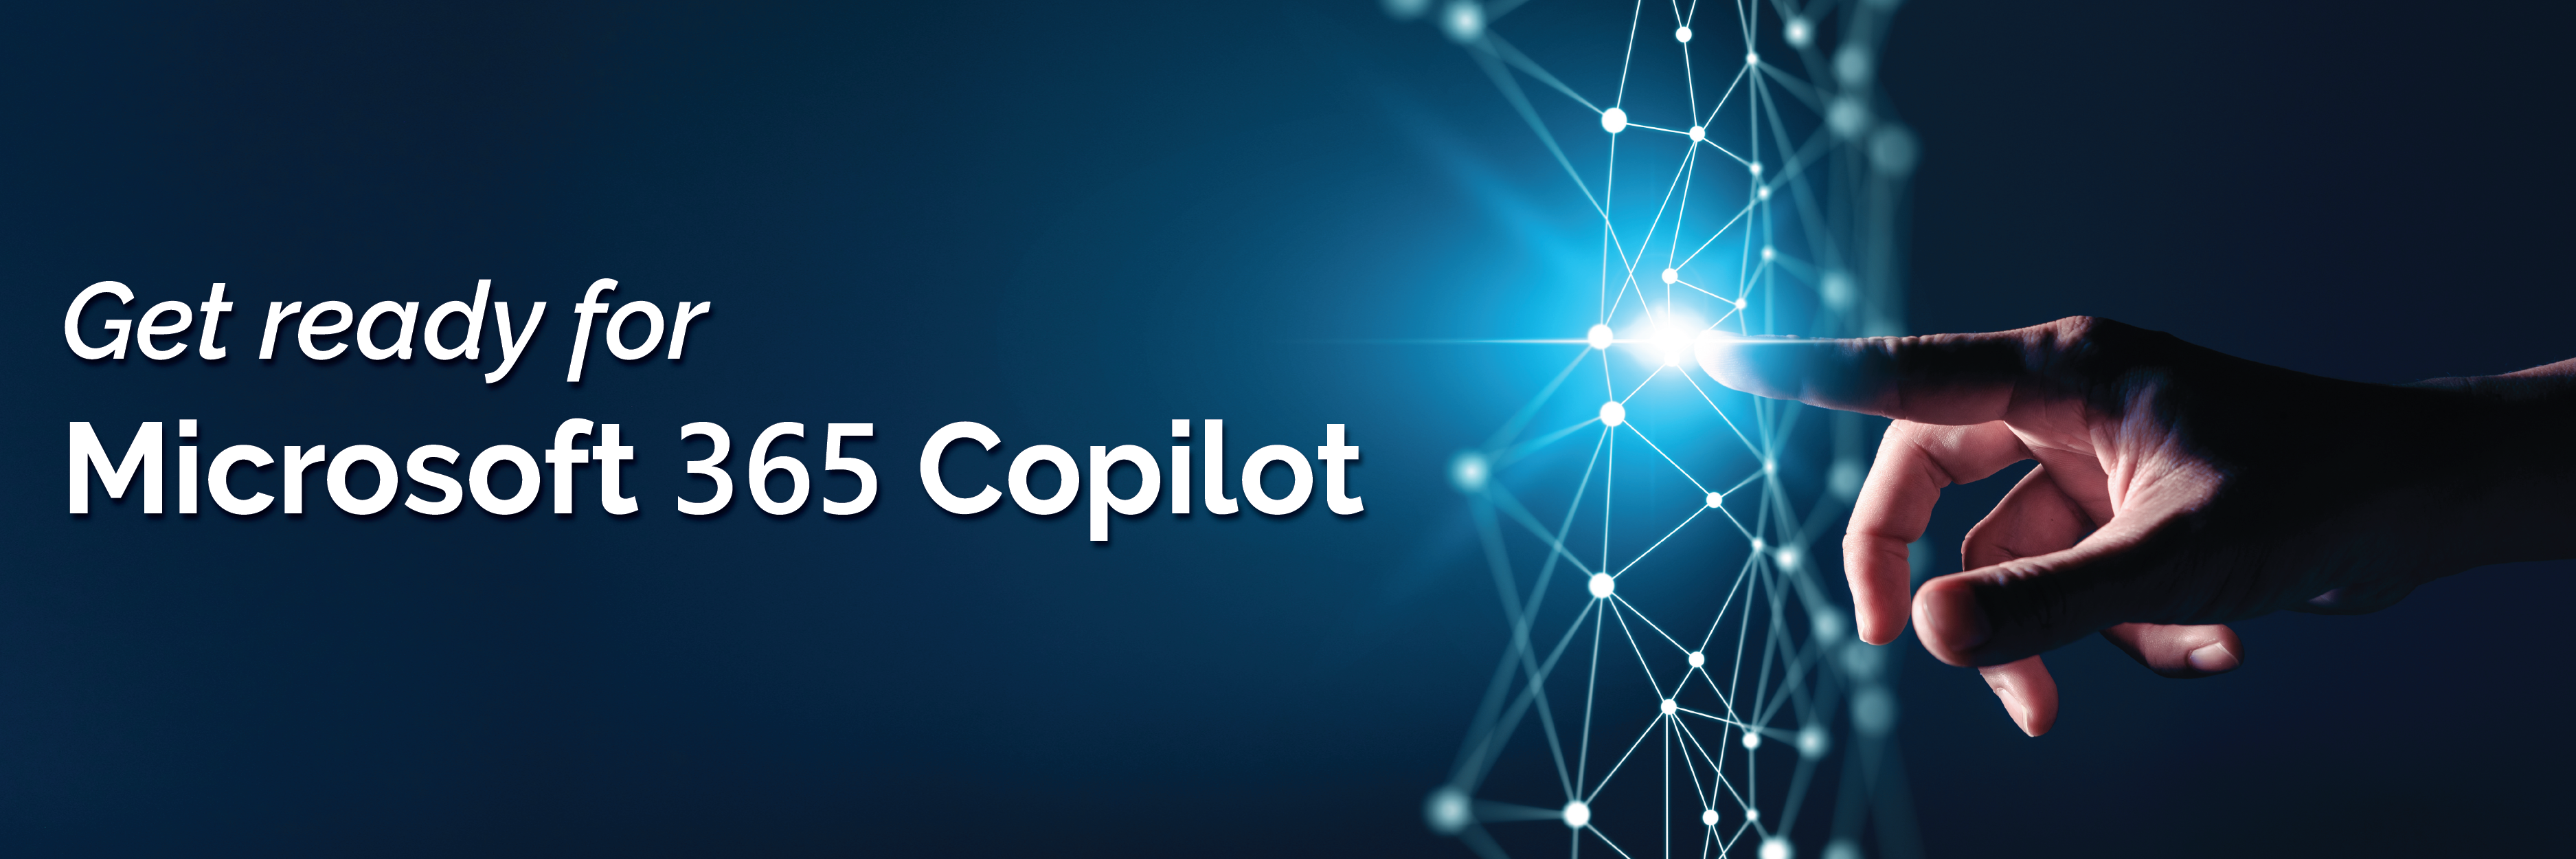 Get ready for Microsoft 365 Copilot